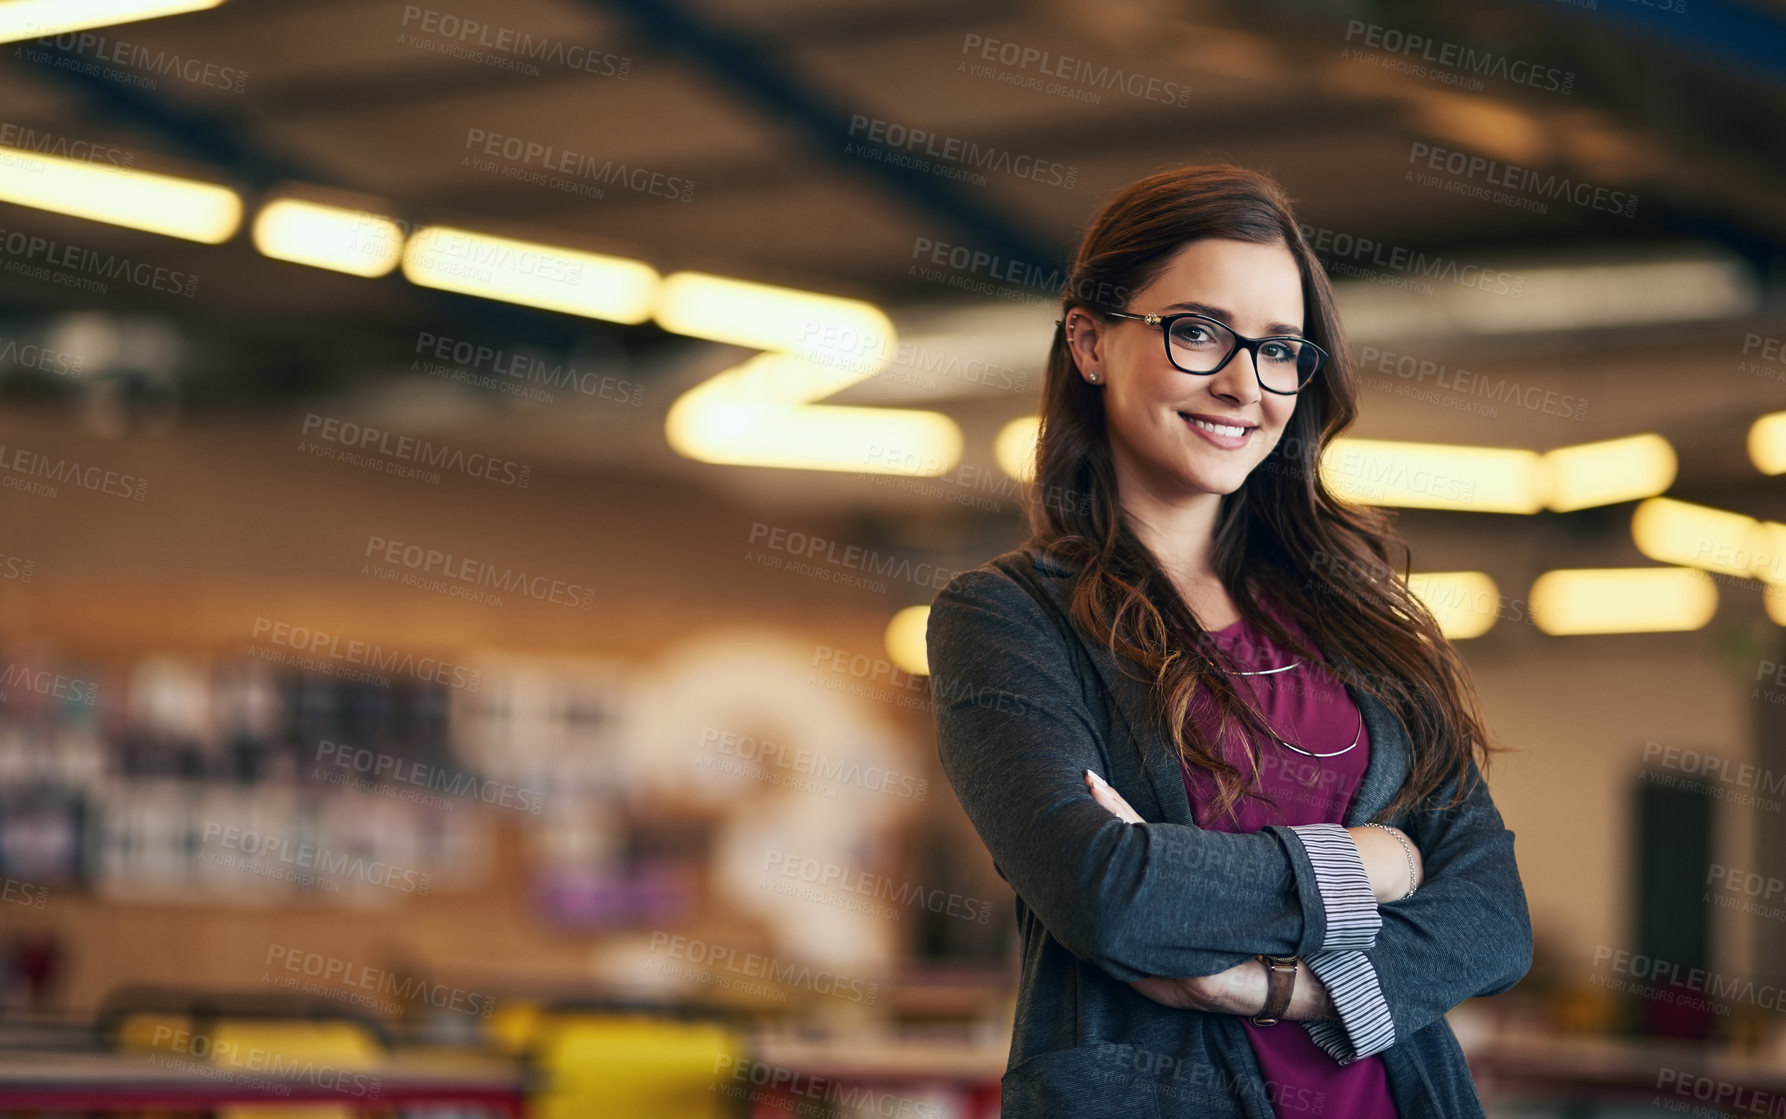 Buy stock photo Portrait of a confident young businesswoman working in a modern office